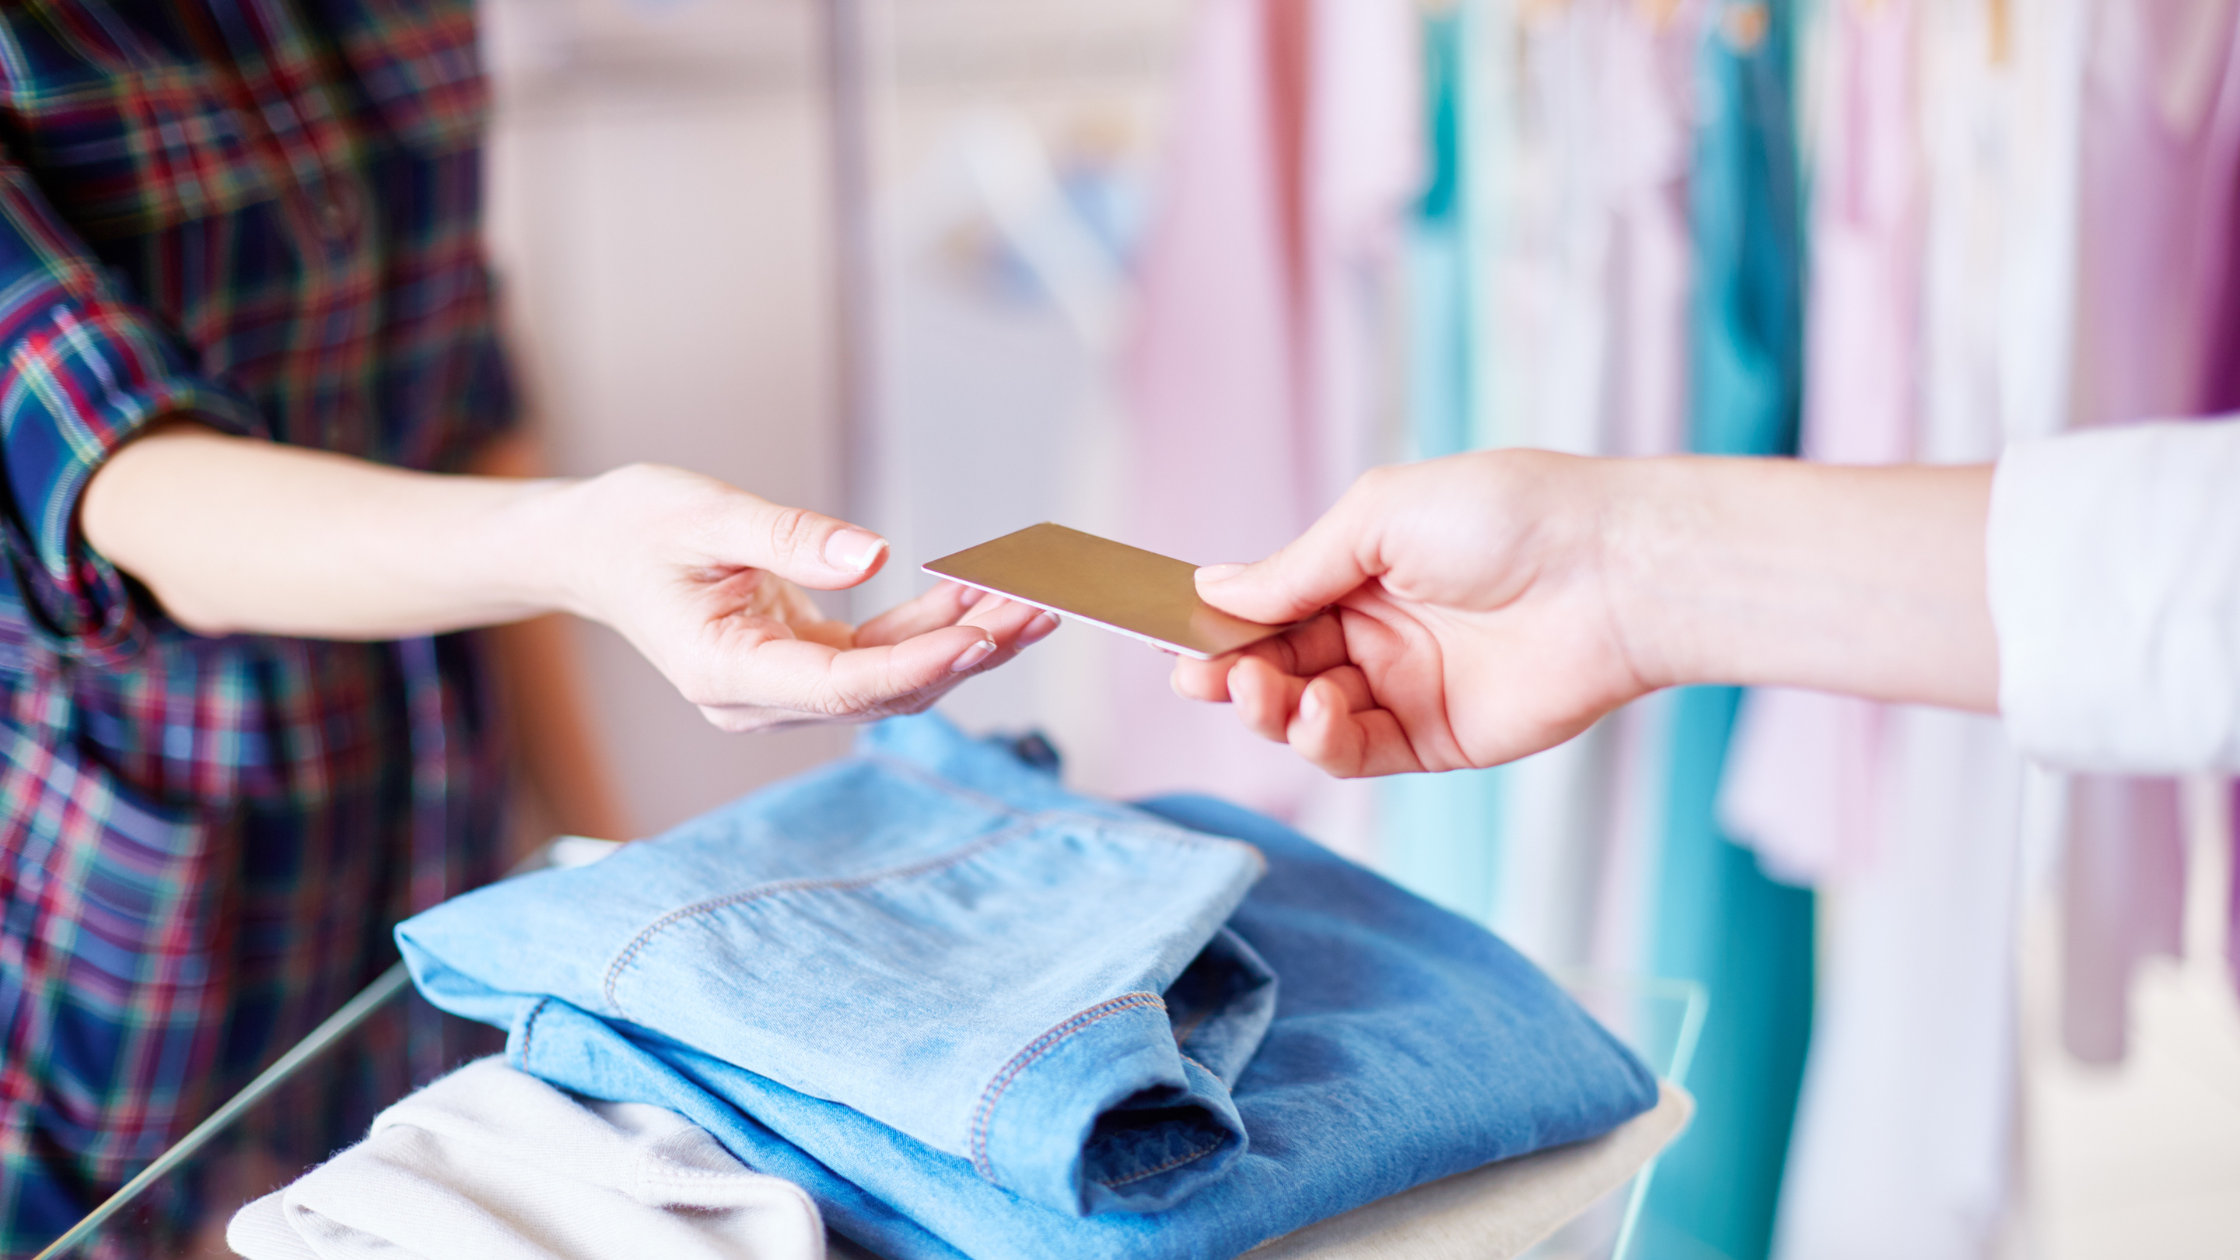 How Technology is Transforming the Retail Industry